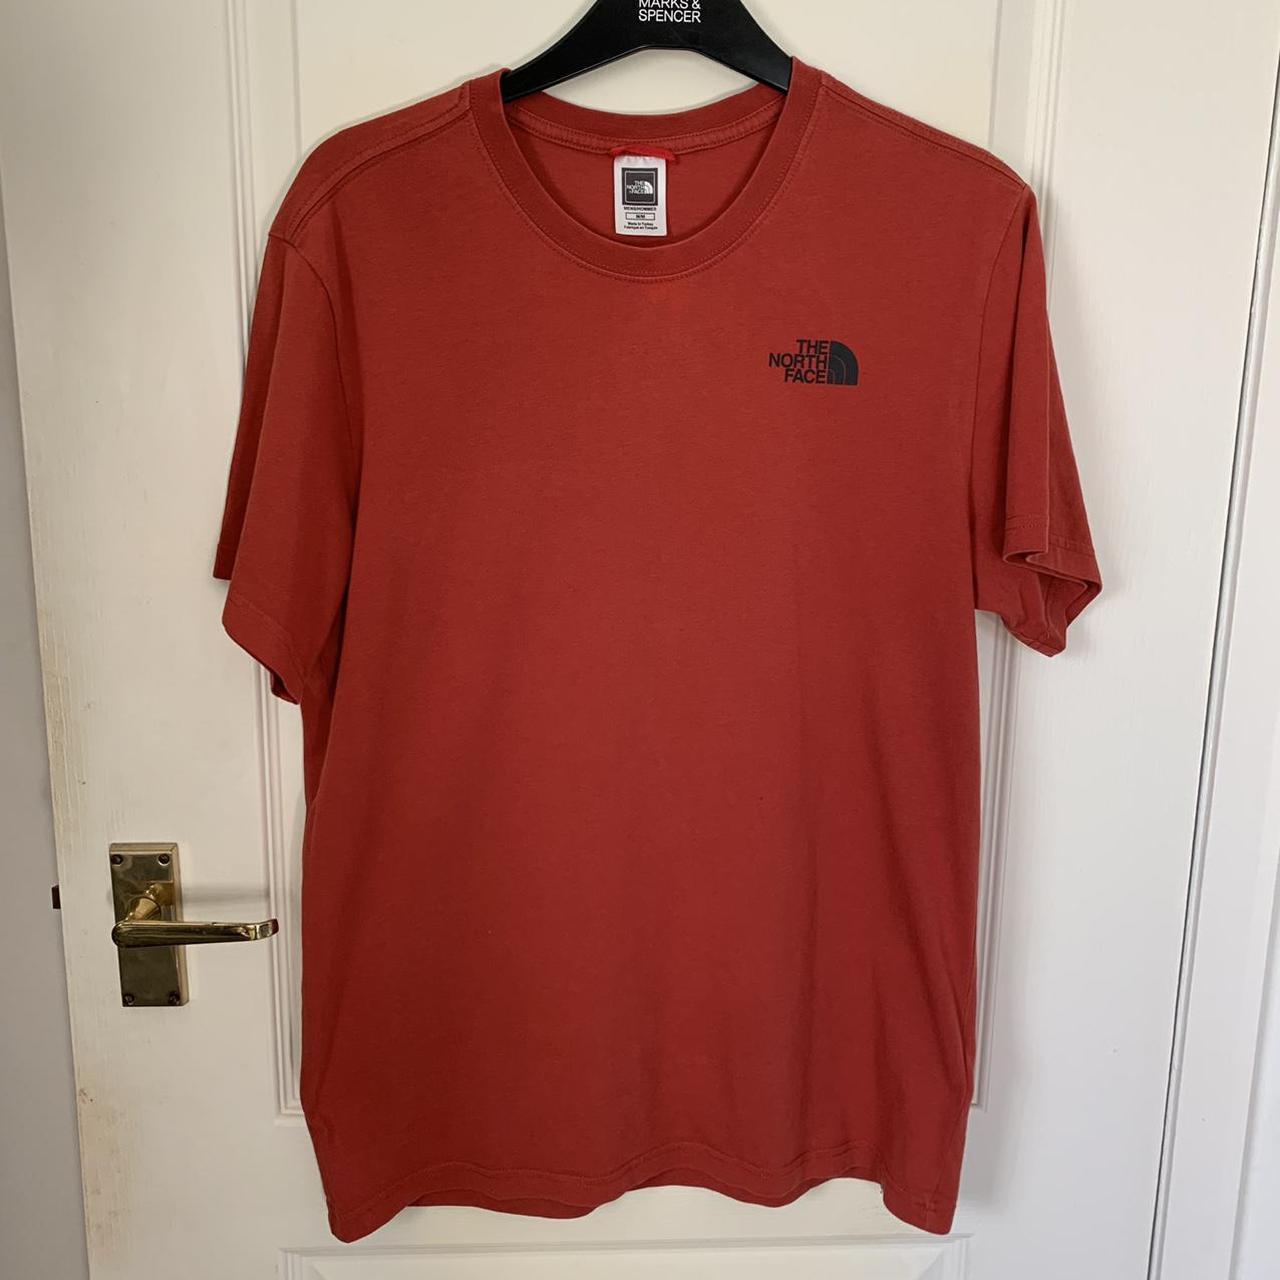 The North Face Men's Red and Orange T-shirt | Depop